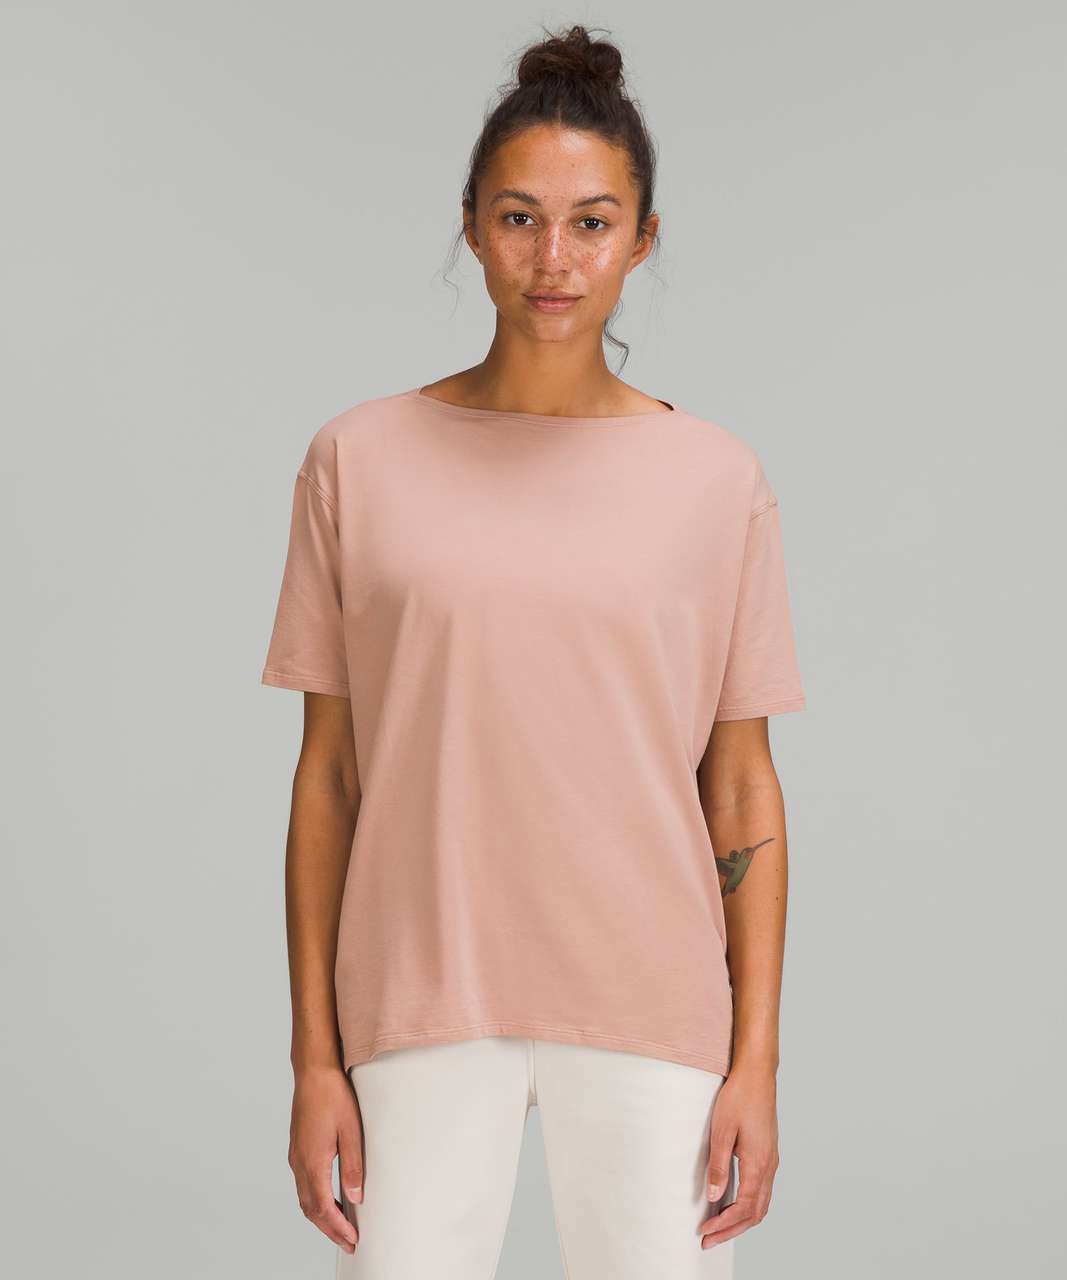 Lululemon Back in Action Short Sleeve Shirt - Pink Clay